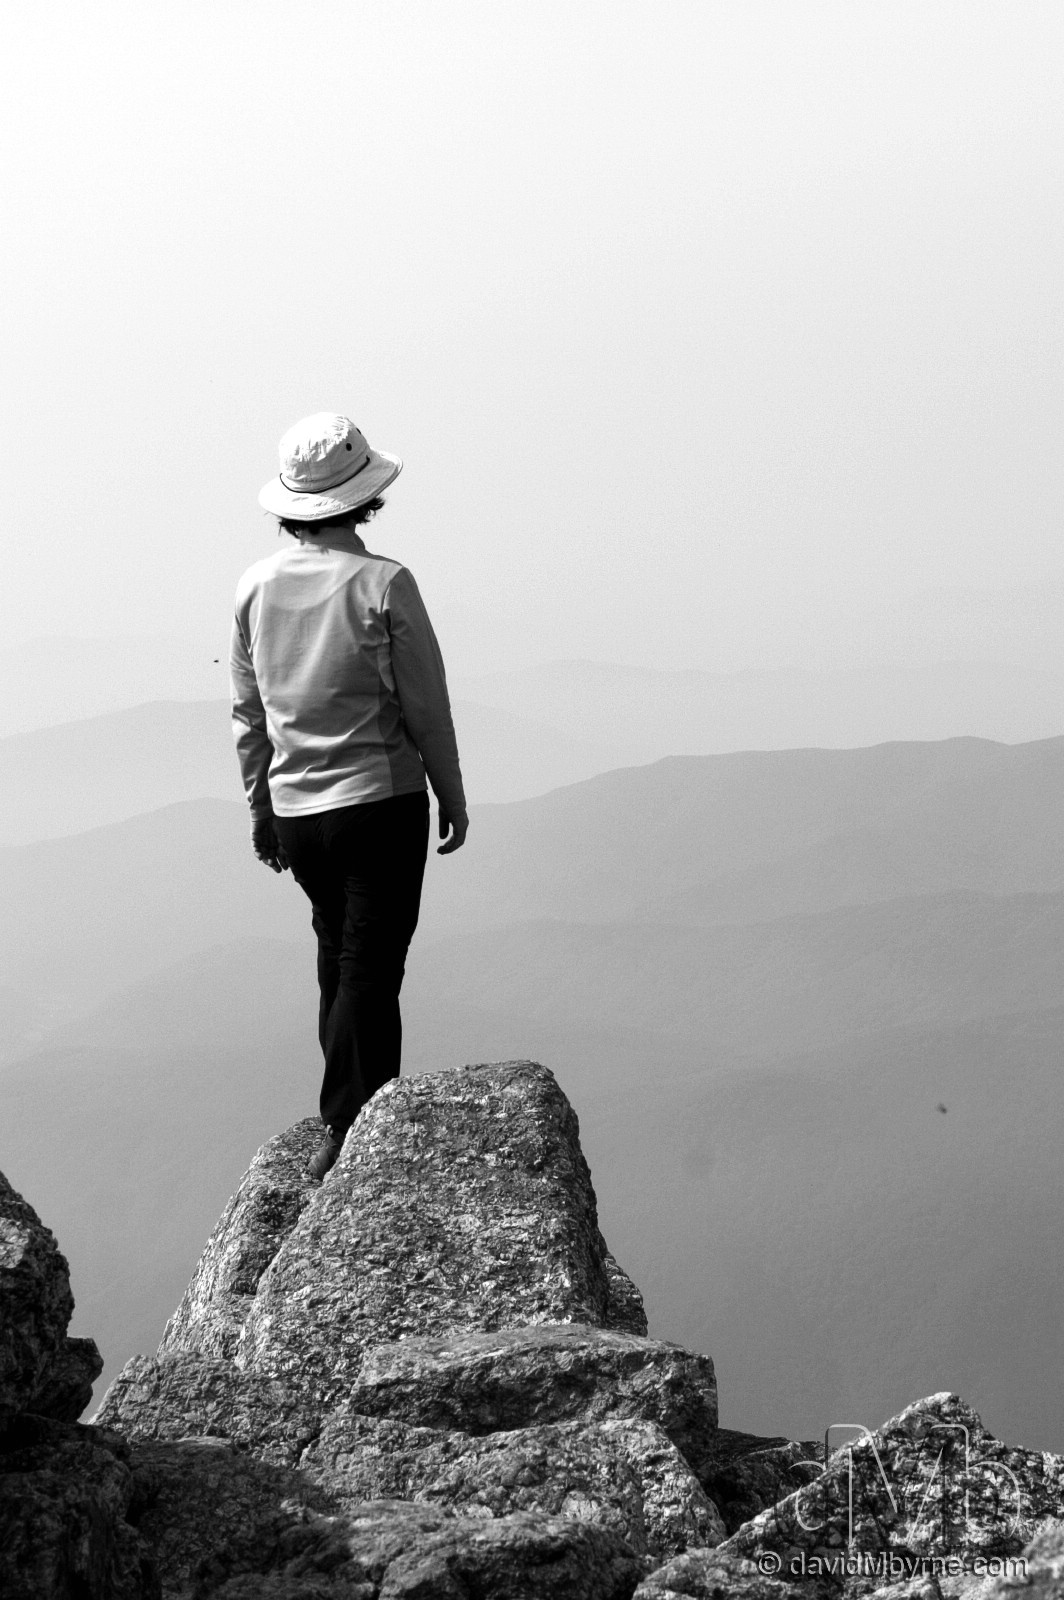 Taking in the view from the summit of Mount Seoraksan in Seoraksan National Park, South Korea. June 28th, 2009 (50mm, 1/1000sec, f/9.0, iso200) 